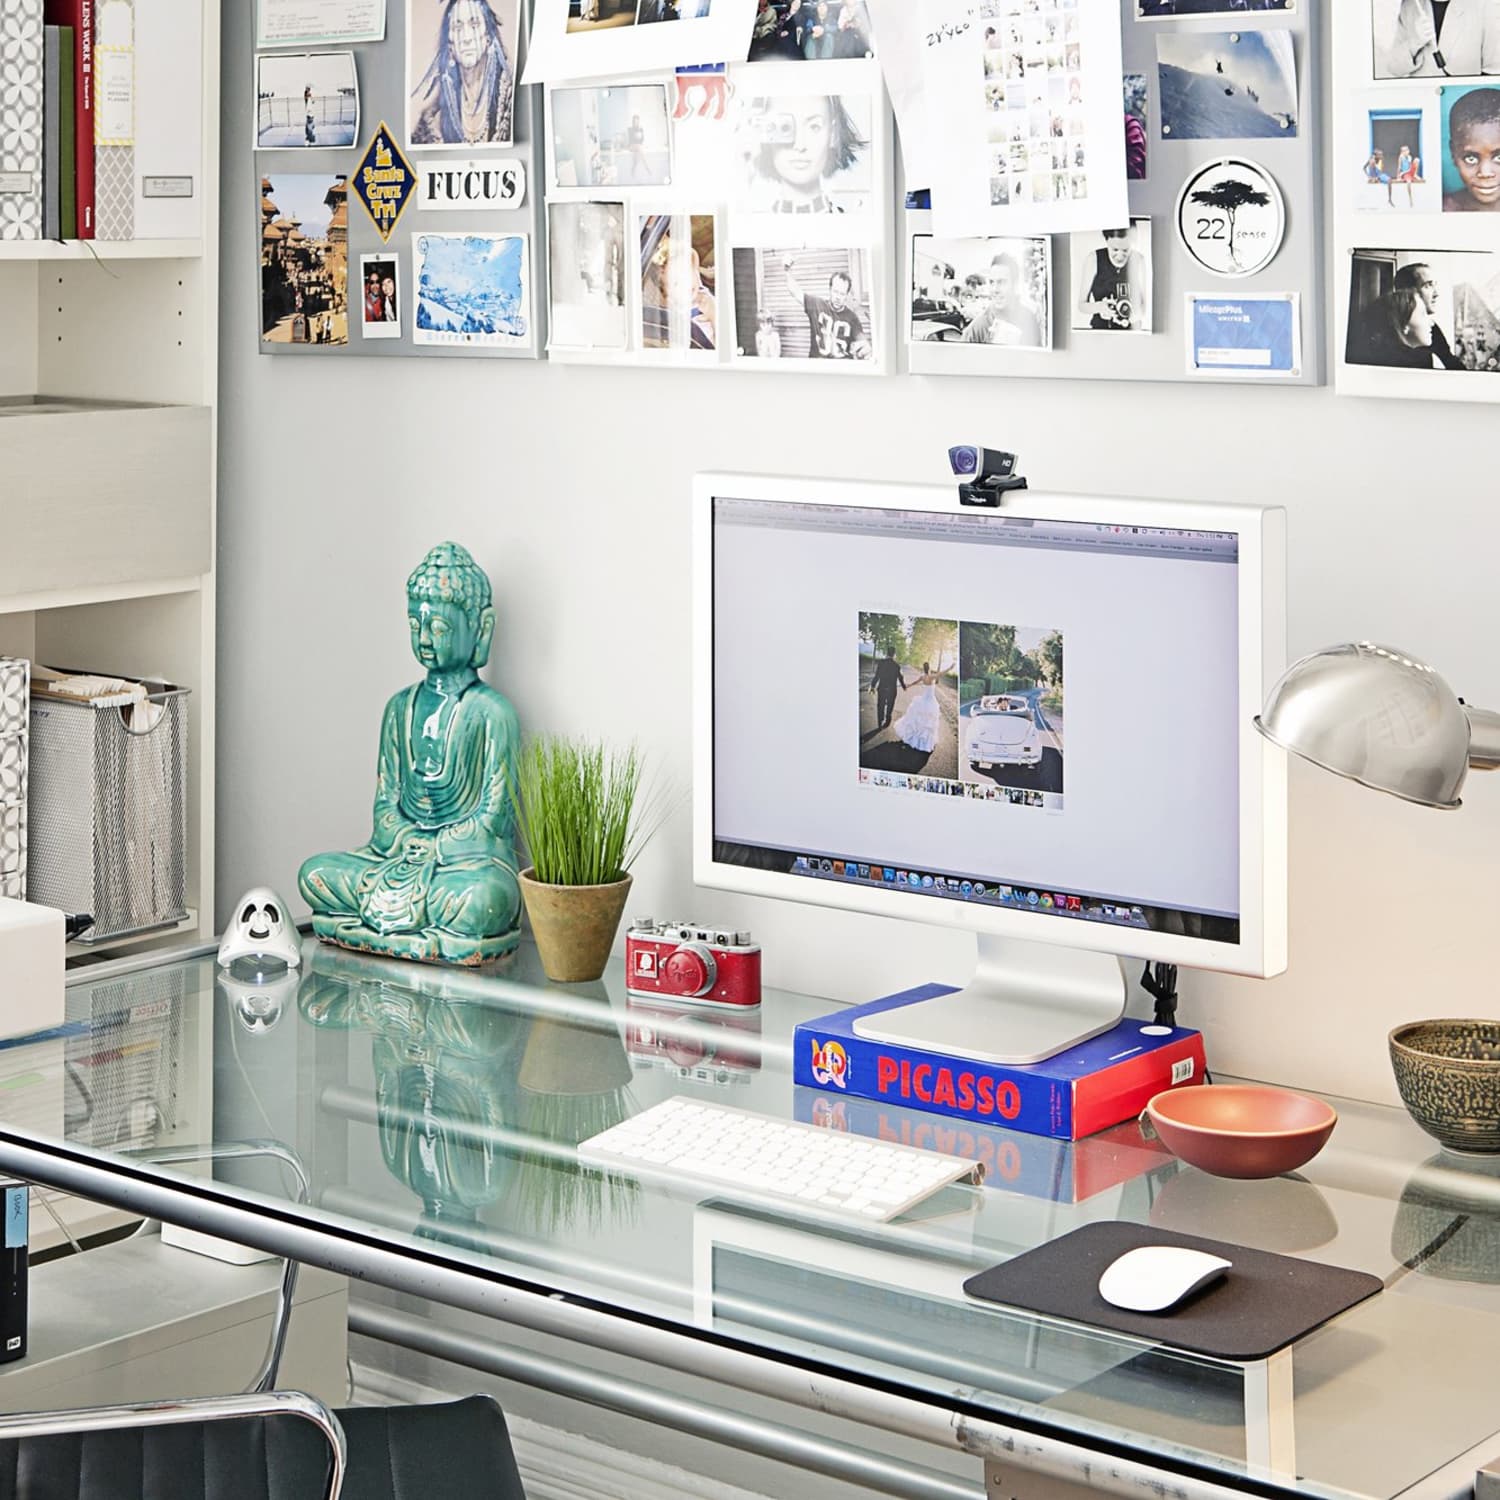 How to organize desk accessories for a home office? What are some different  types of desk accessories and what are their purposes - Quora